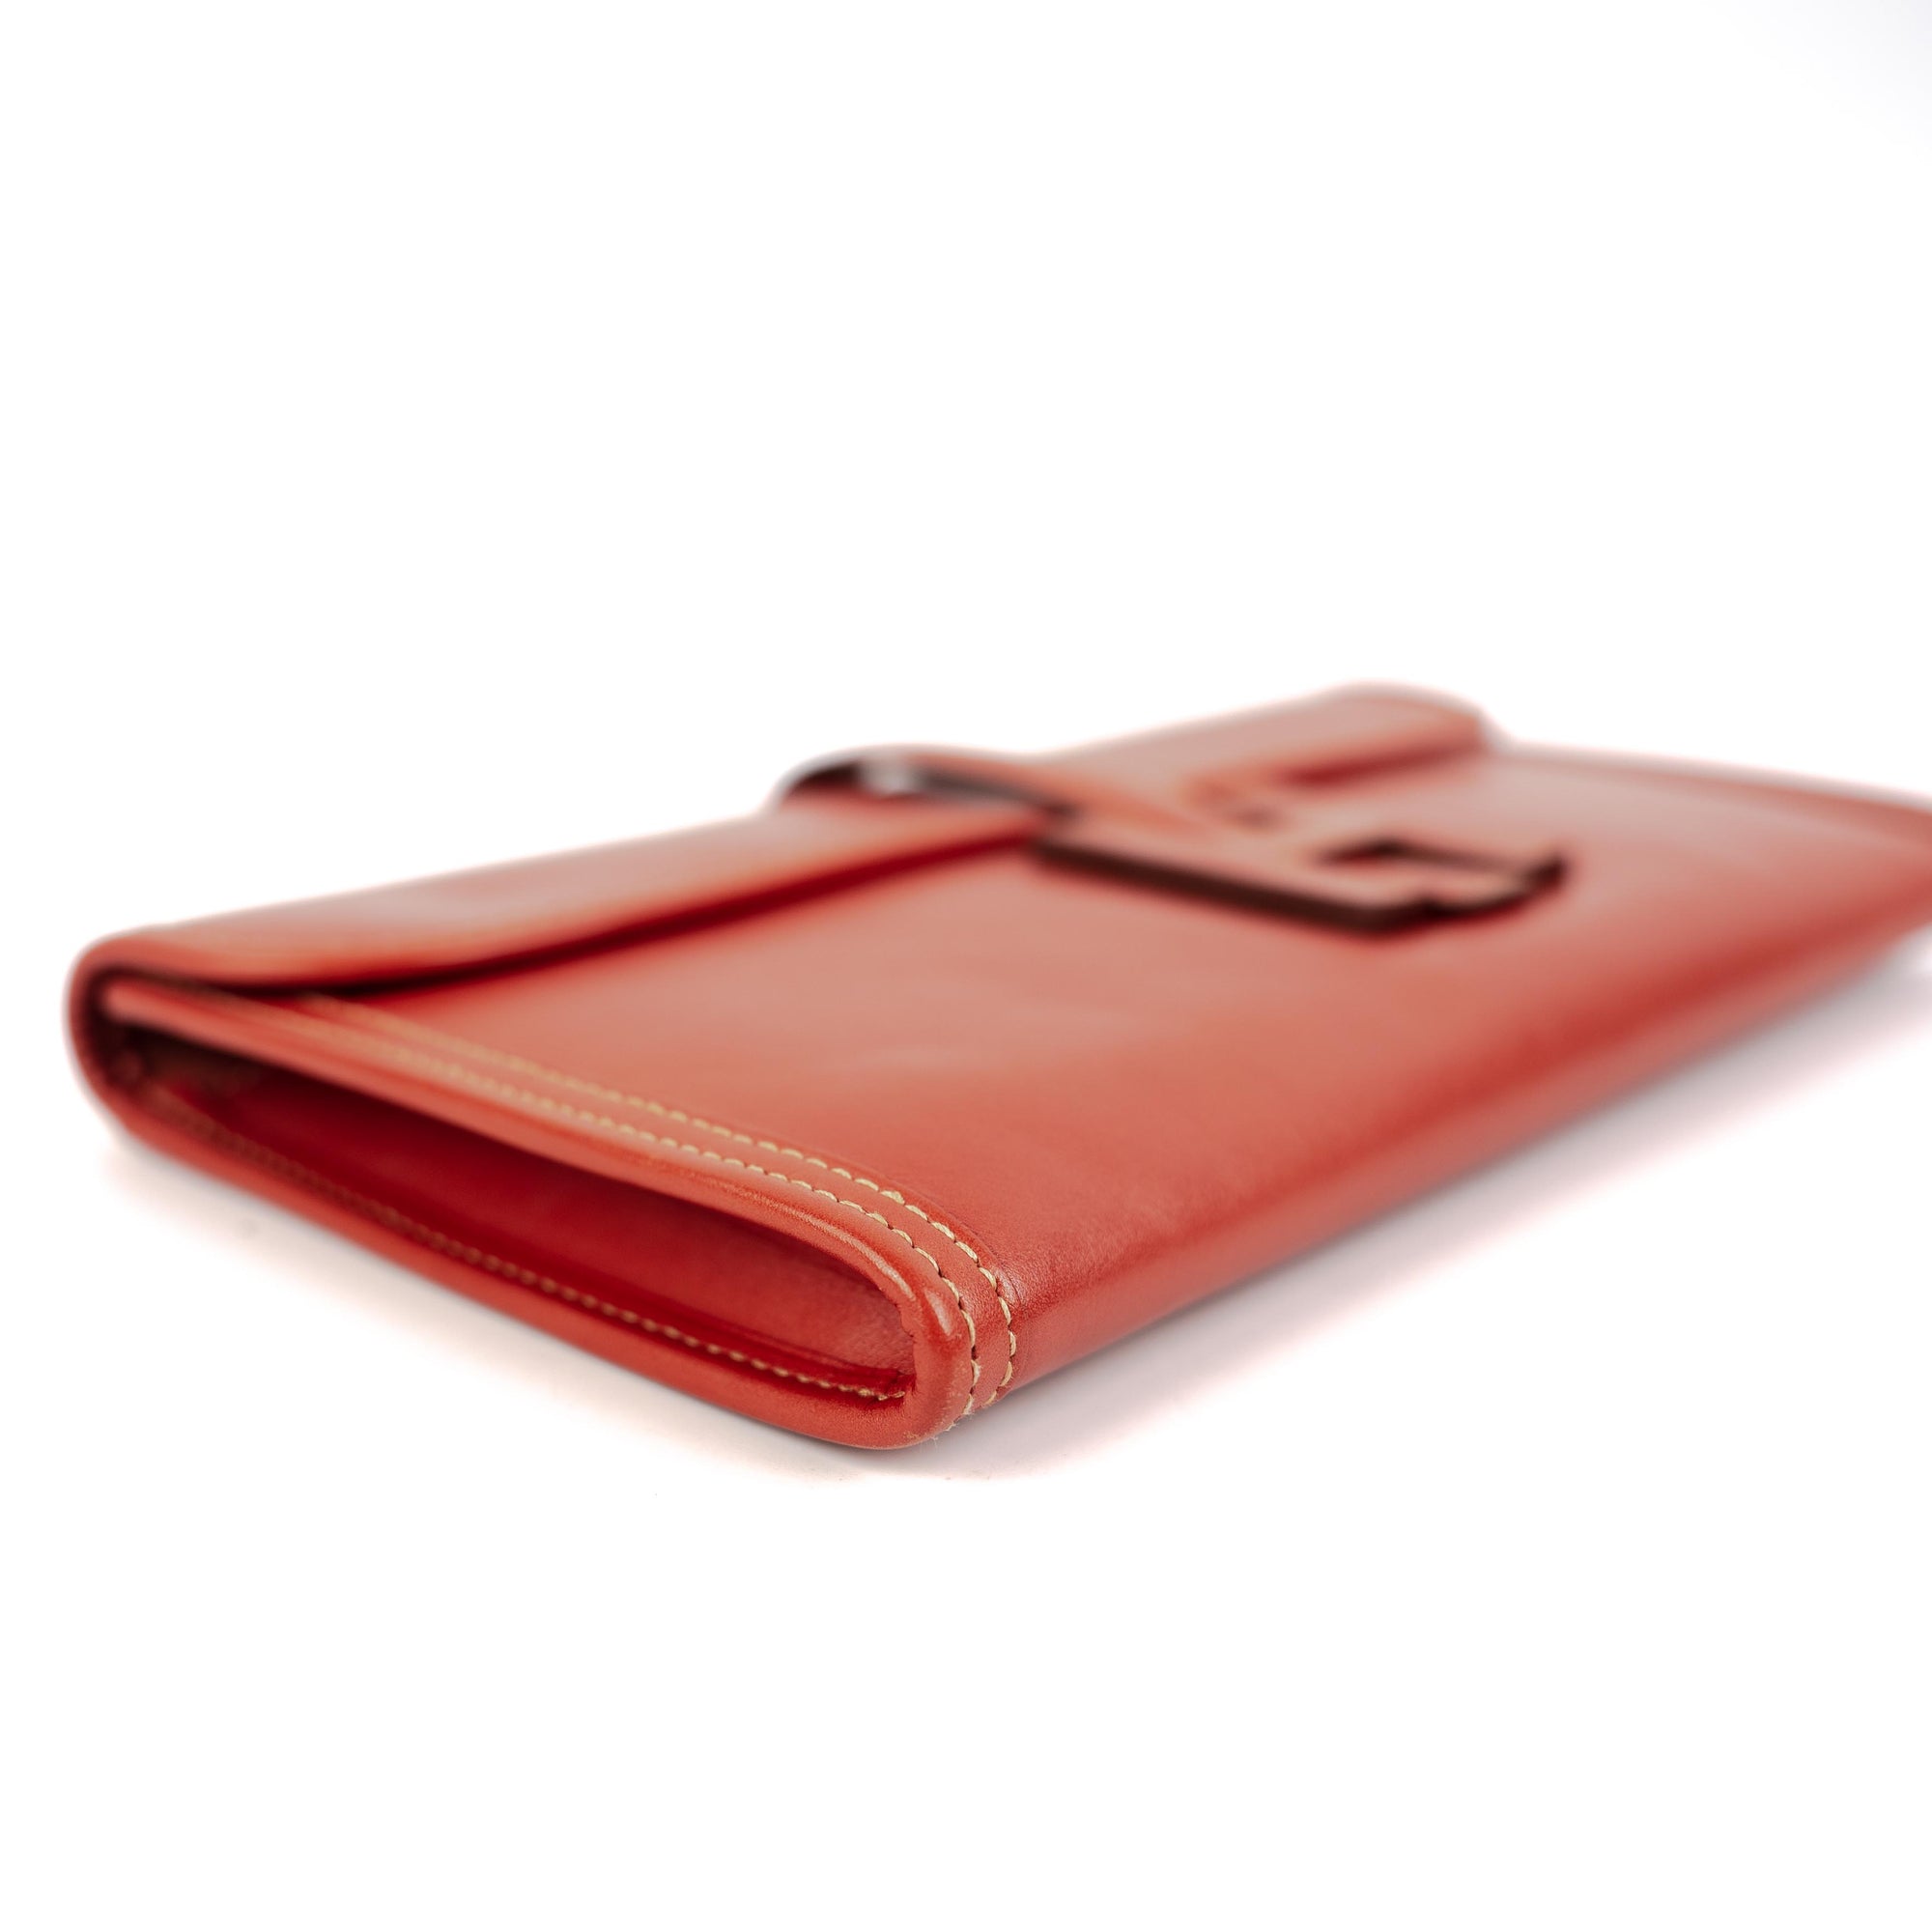 hermes red clutch